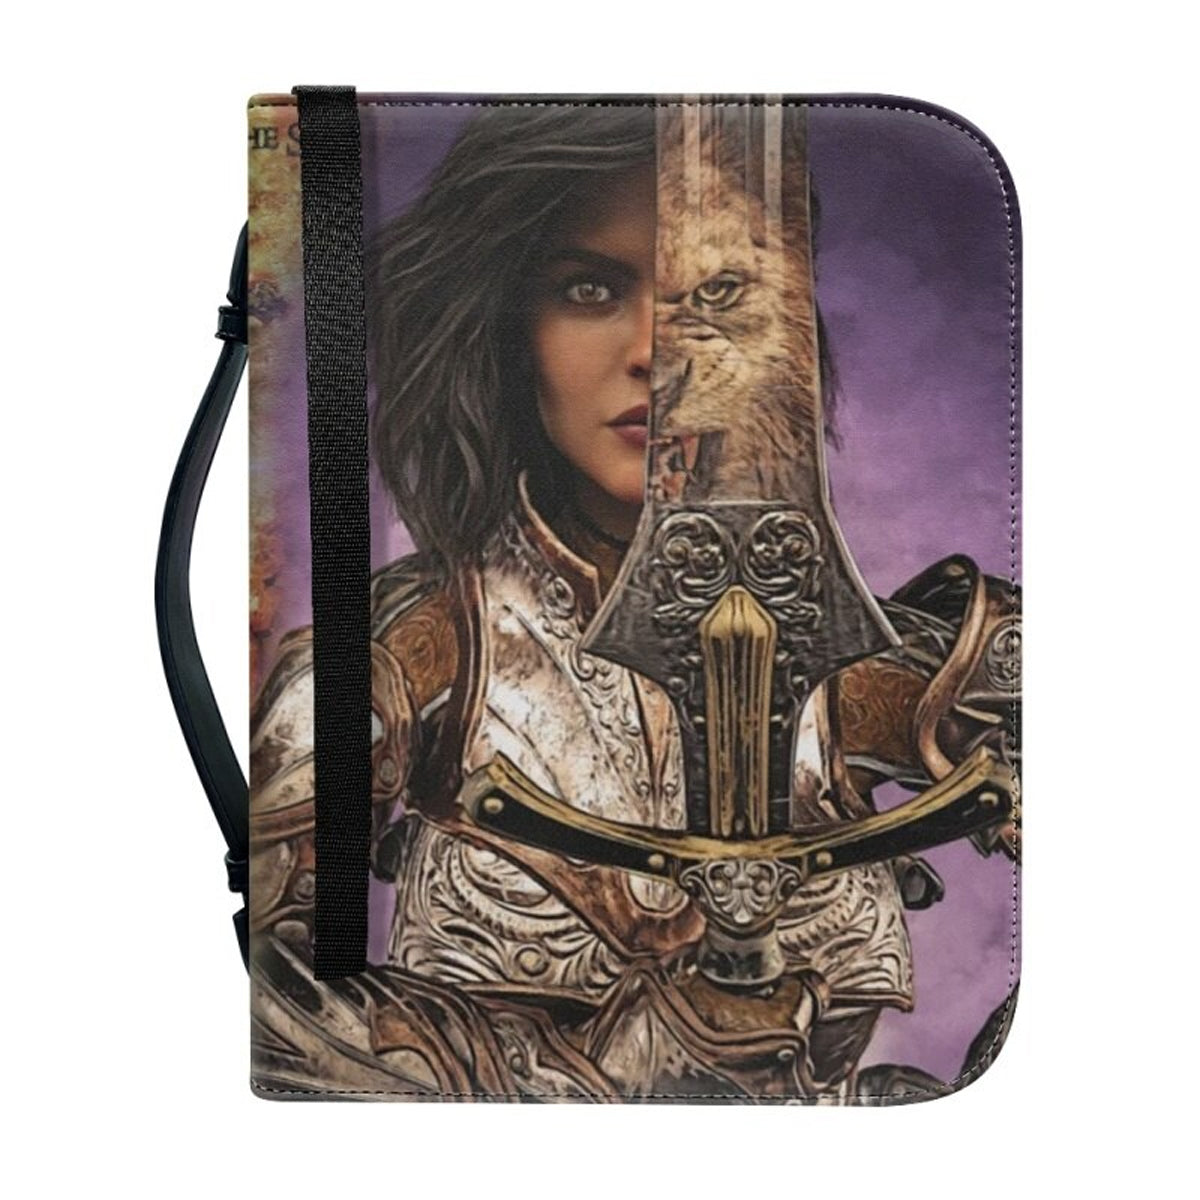 Christianartbag Bible Cover, Female Warrior With Sword With Lion. Bible Cover, Personalized Bible Cover, Gifts For Women, Christmas Gift, CABBBCV02080823. - Christian Art Bag